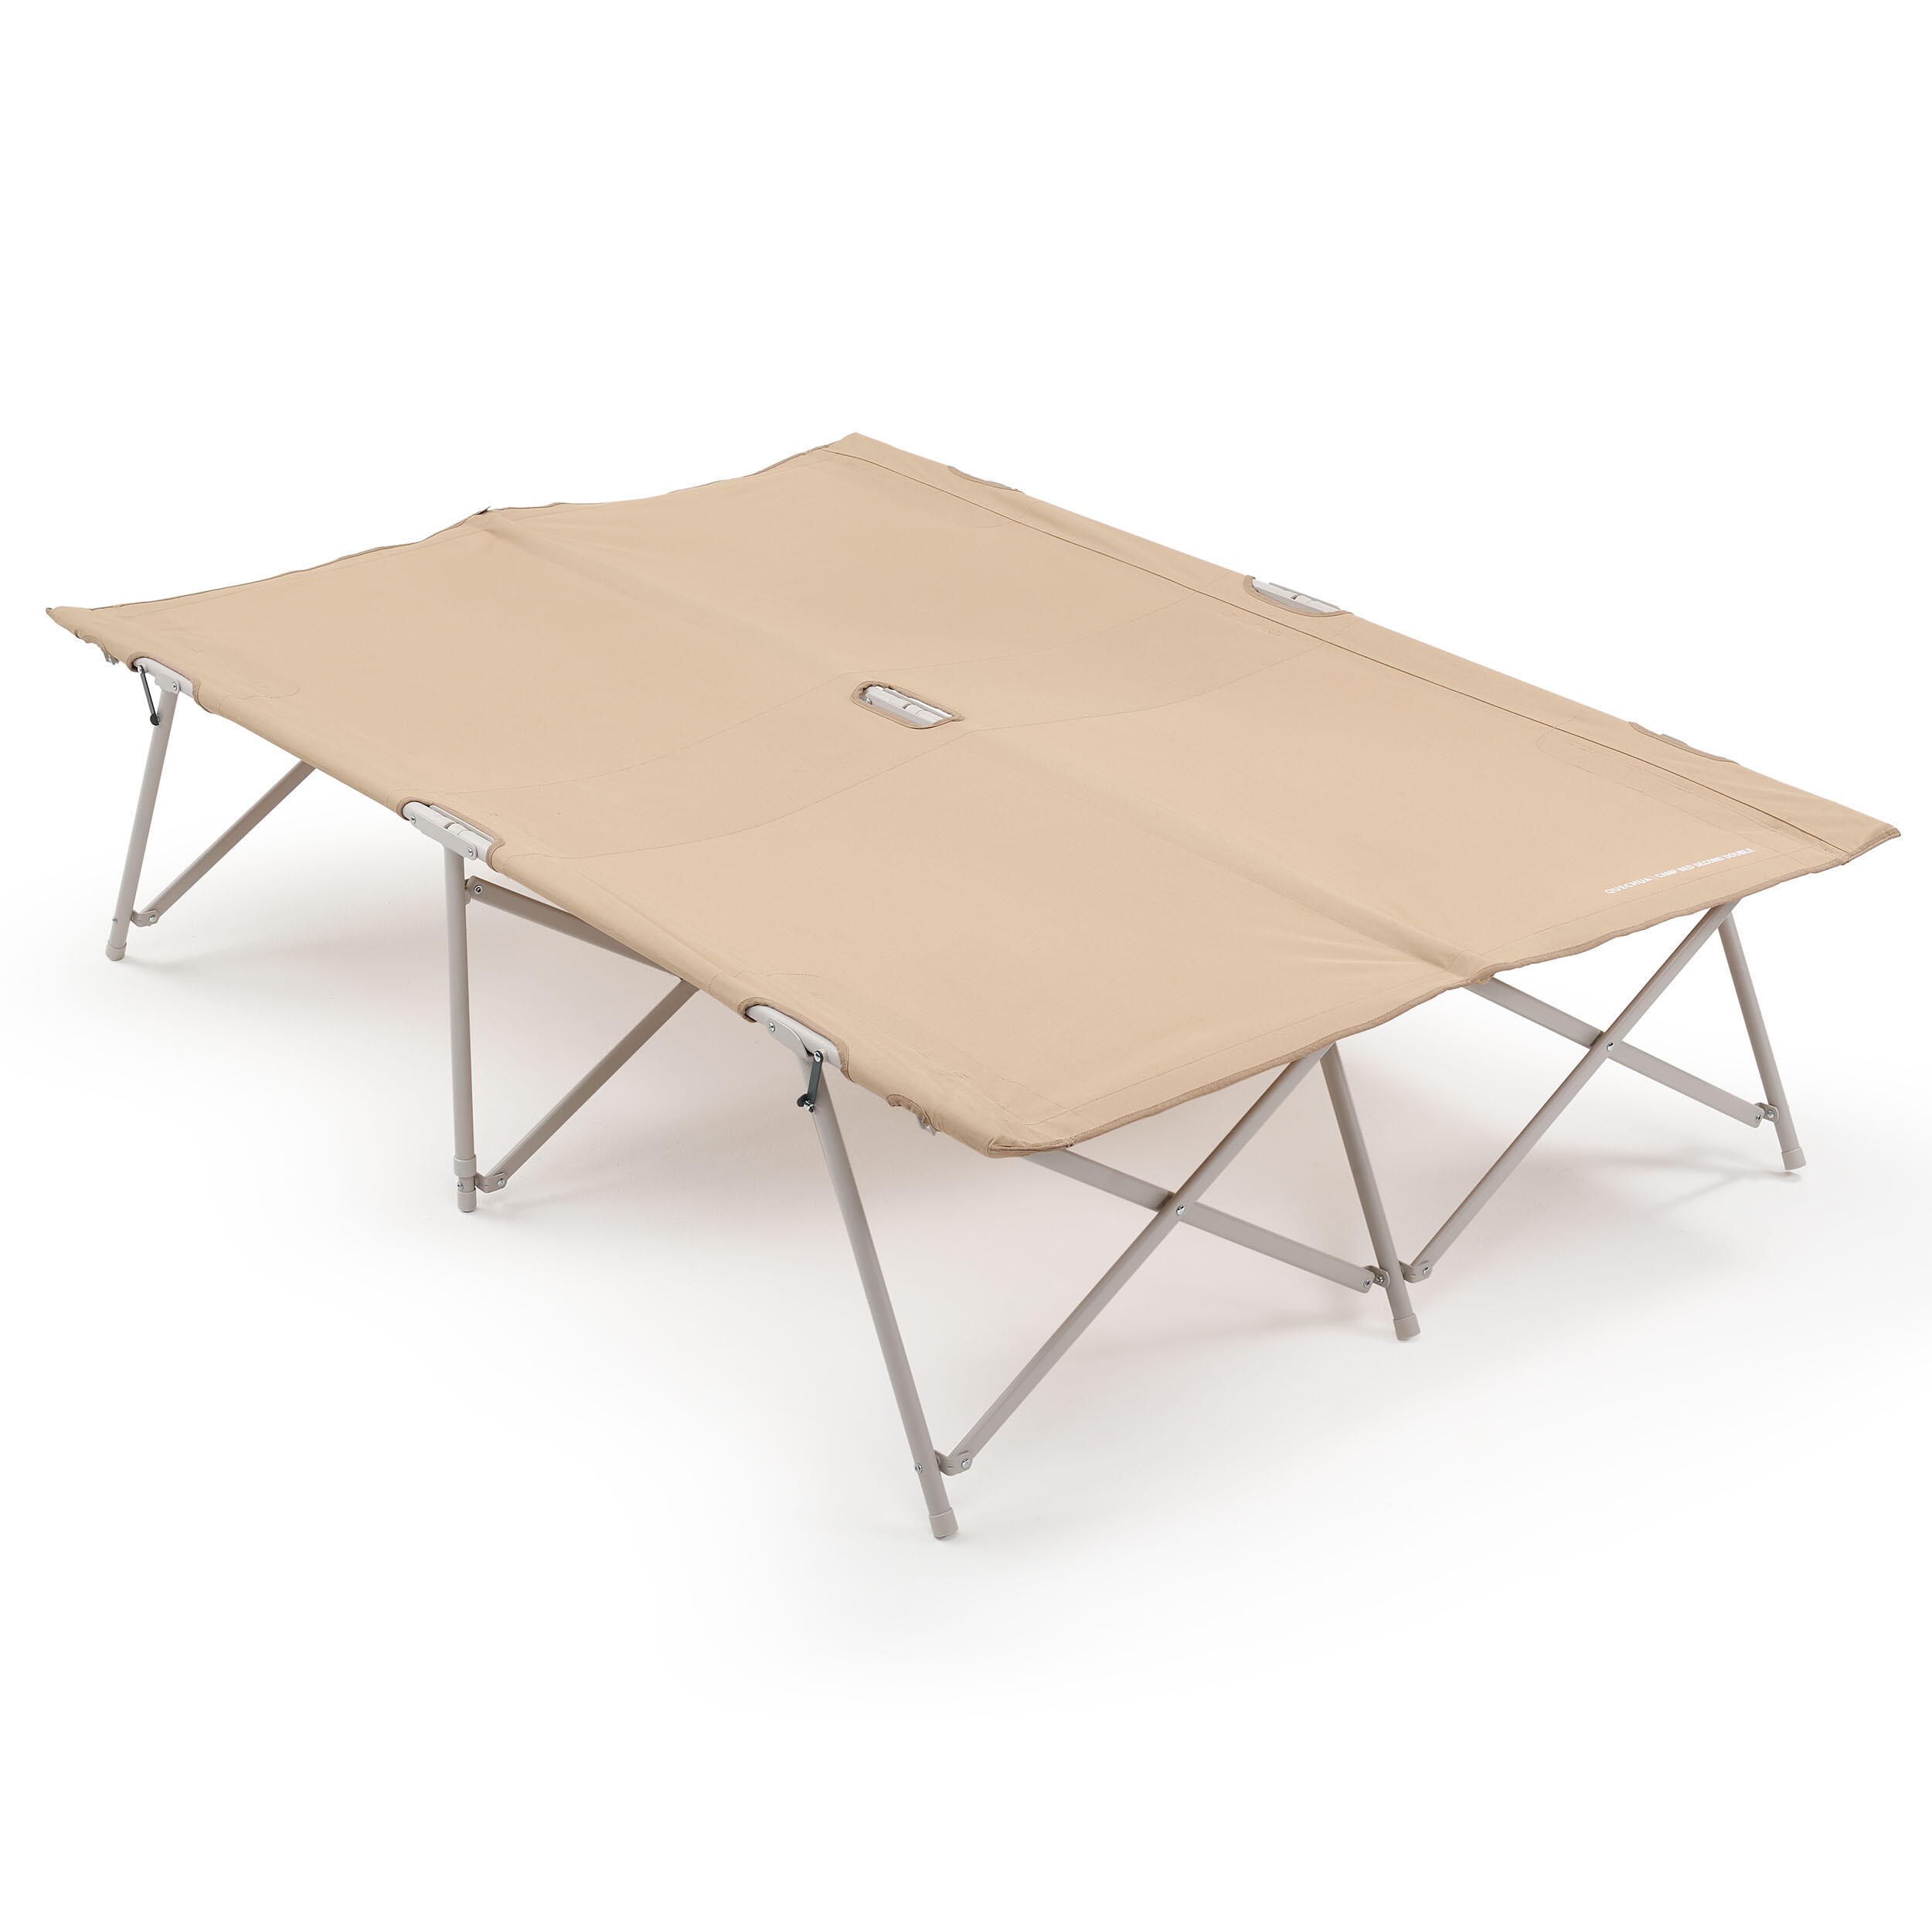 taltsang-for-camping-double-camp-bed-seconds-130-cm-2-personer